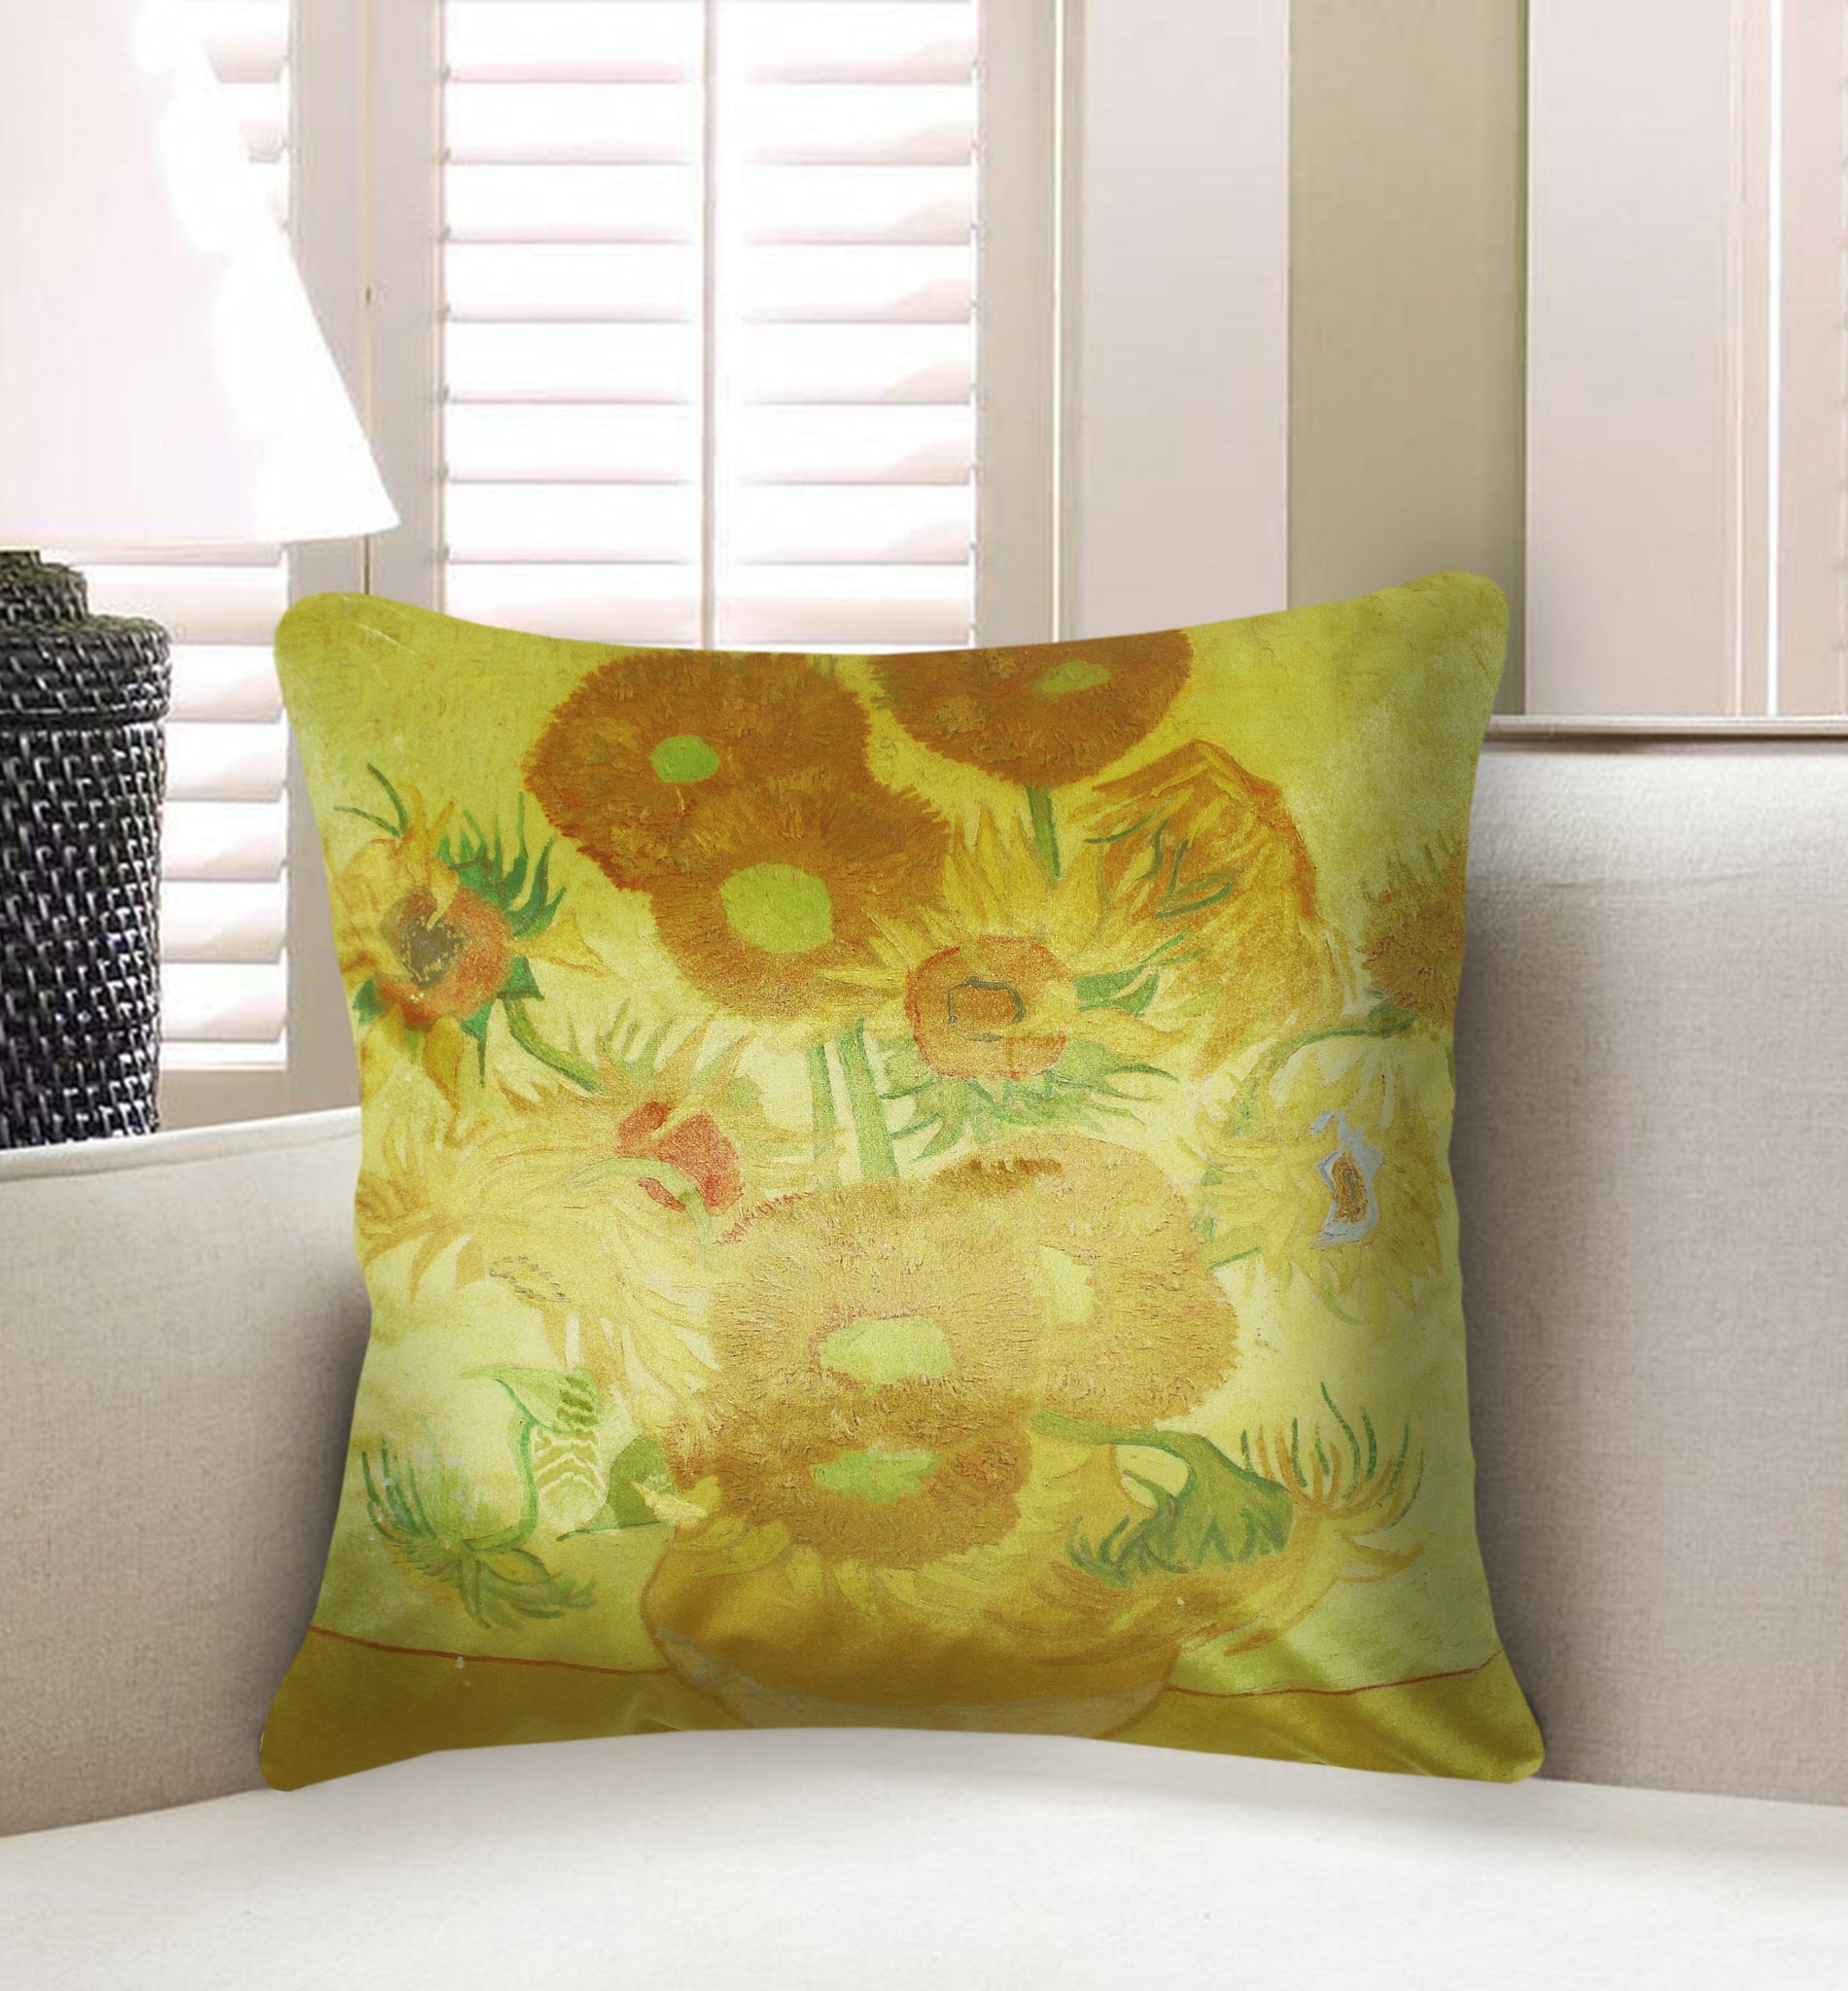 Yellow Velvet Cushion Cover Vincent Van Gogh's Sunflower Paint Decorative Pillow Cover Home Decor Throw Pillow for Sofa Chair 45x45 cm 18x18 In